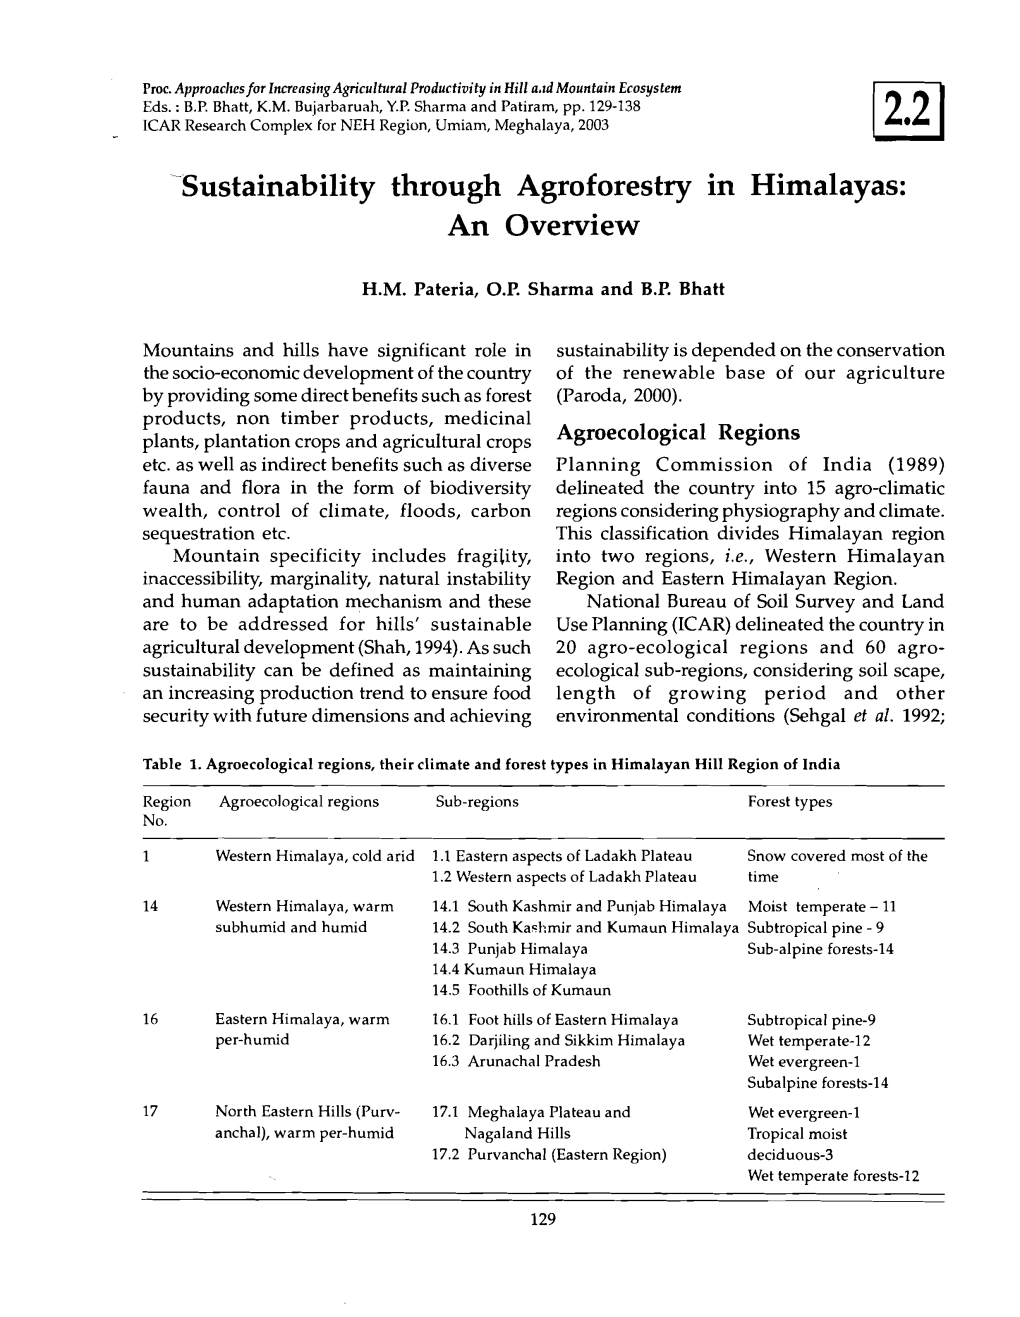 Sustainability Through Agroforestry in Himalayas: an Overview